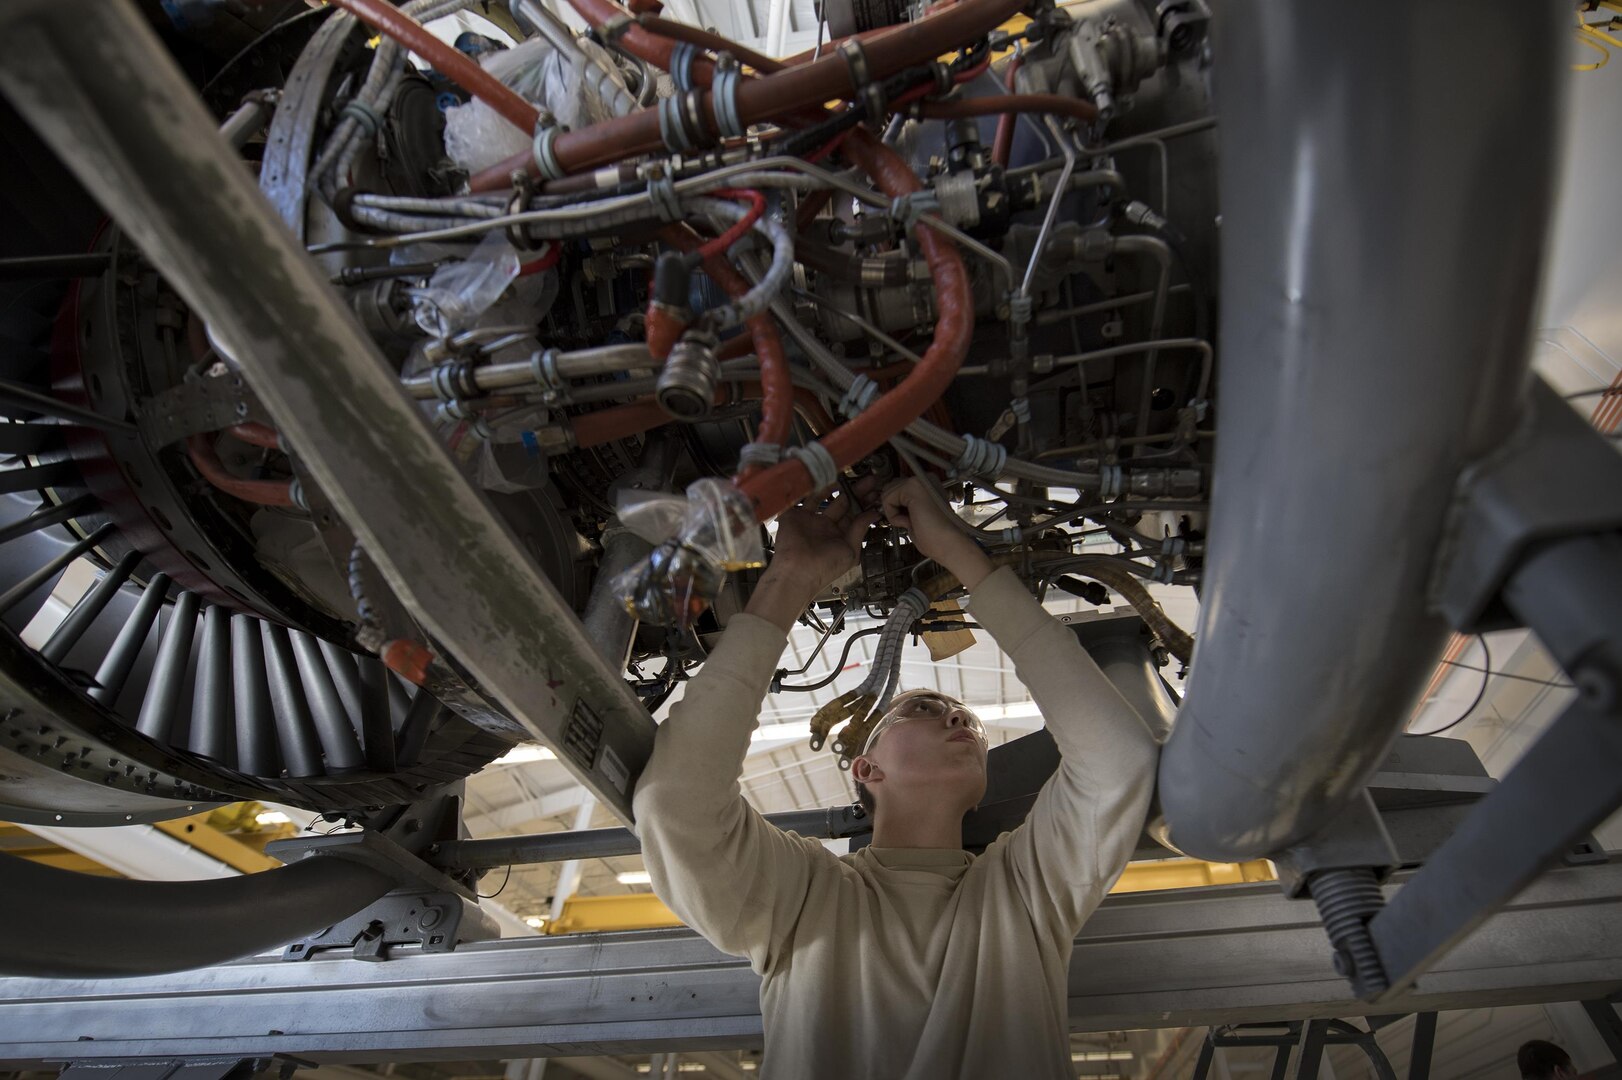 Airman 1st Class Anthony Guevara, 23d Component Maintenance Squadron propulsion technician, loosens a connection on the underside of a TF-34 engine used in A-10C Thunderbolt lls, Jan. 25, 2017, at Moody Air Force Base, Ga. Airmen from the propulsion flight are responsible for breaking down, refurbishing and repairing TF-34 engines to replace ones currently in use in A-10s. (U.S. Air Force photo by Airman 1st Class Daniel Snider)